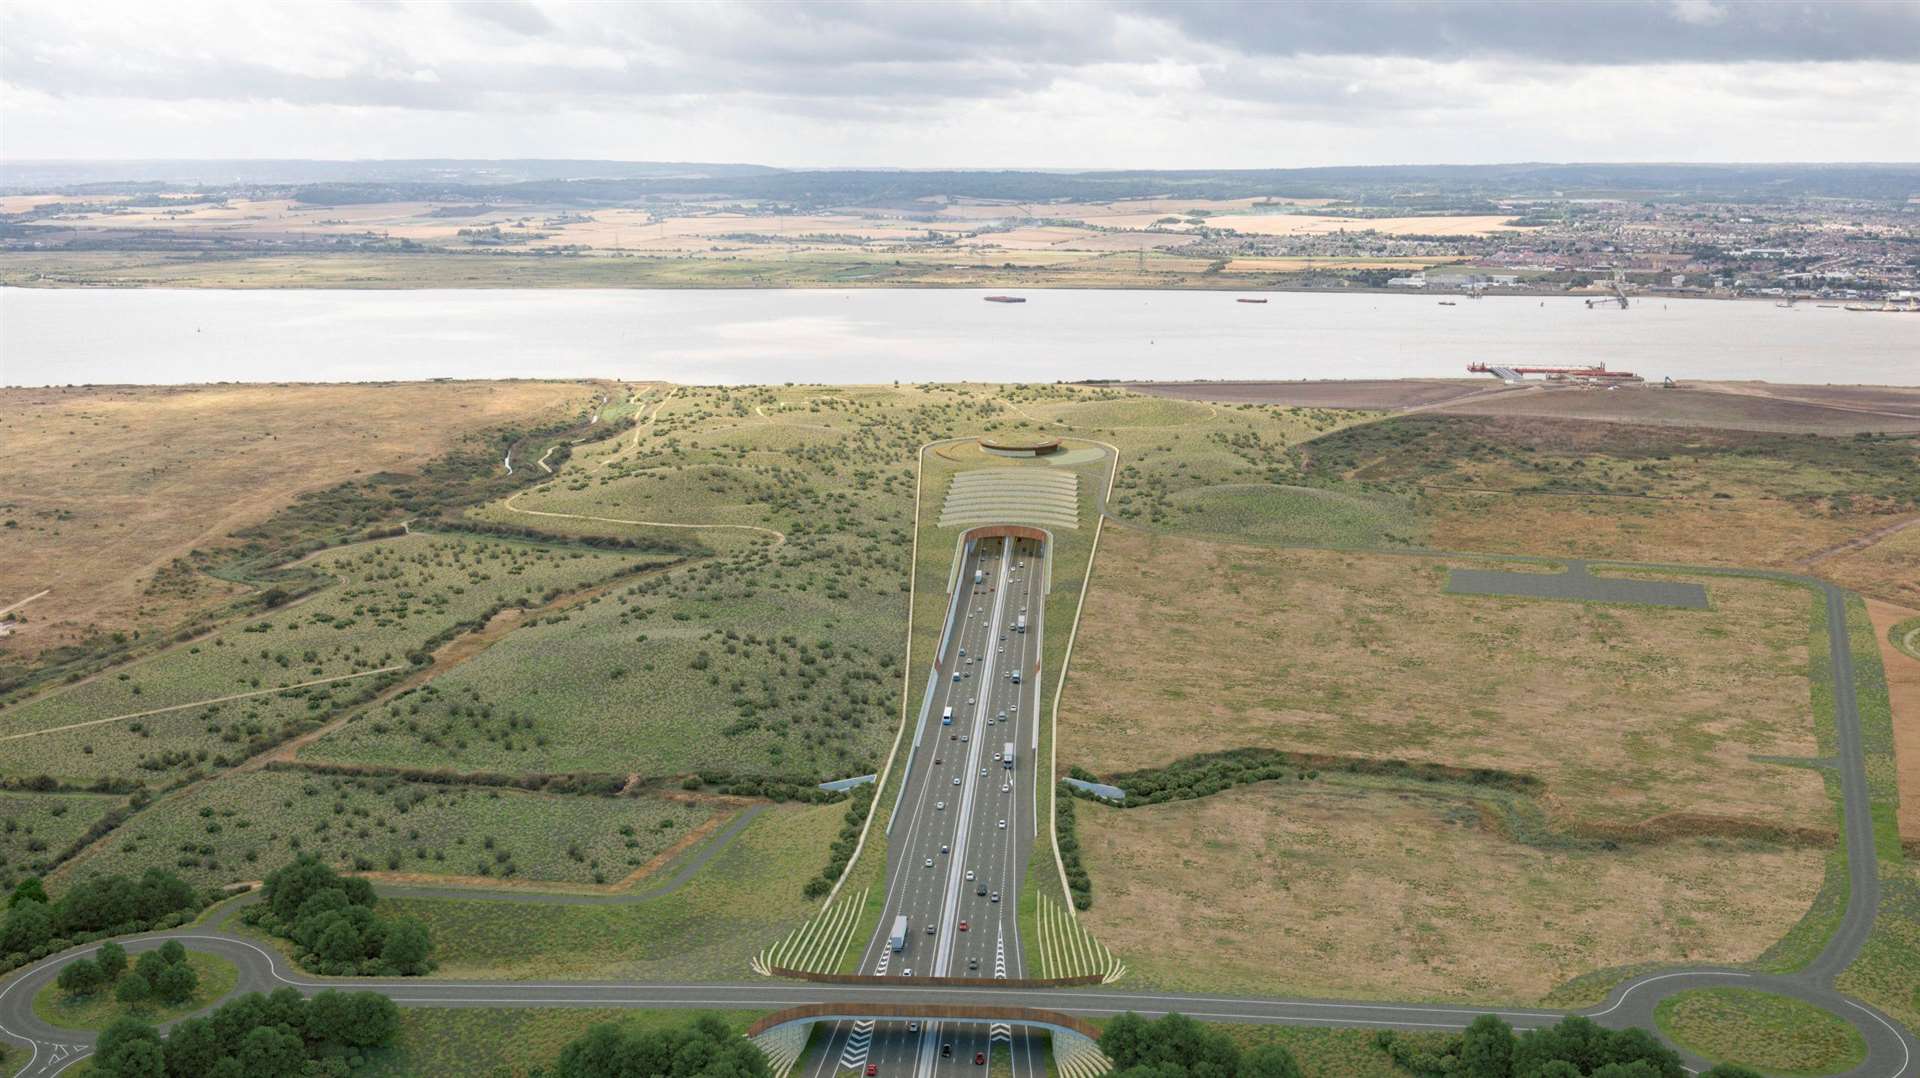 A decision on the Lower Thames Crossing is expected in 2024. Credit: Highways England